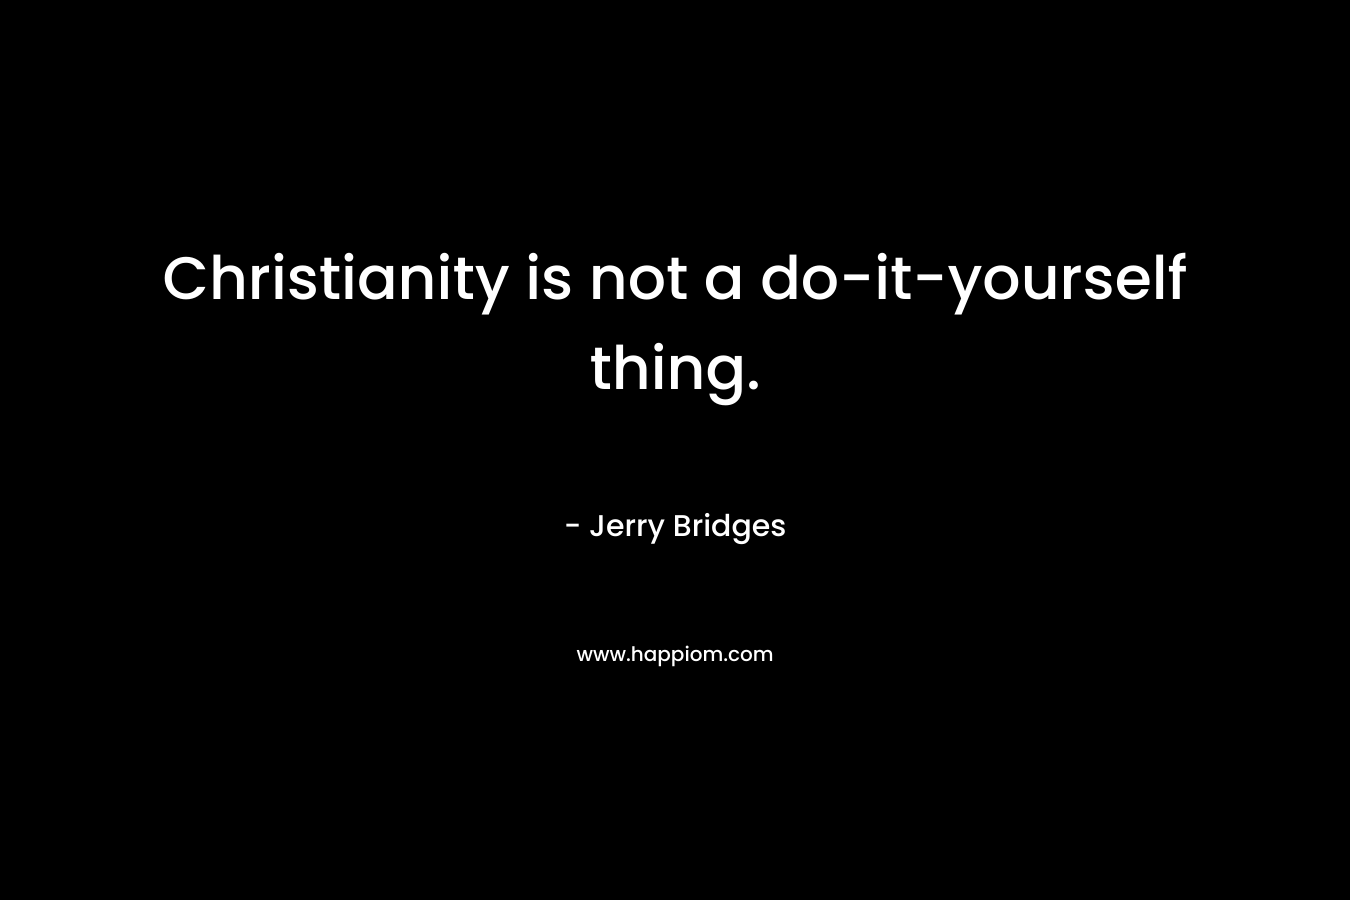 Christianity is not a do-it-yourself thing.